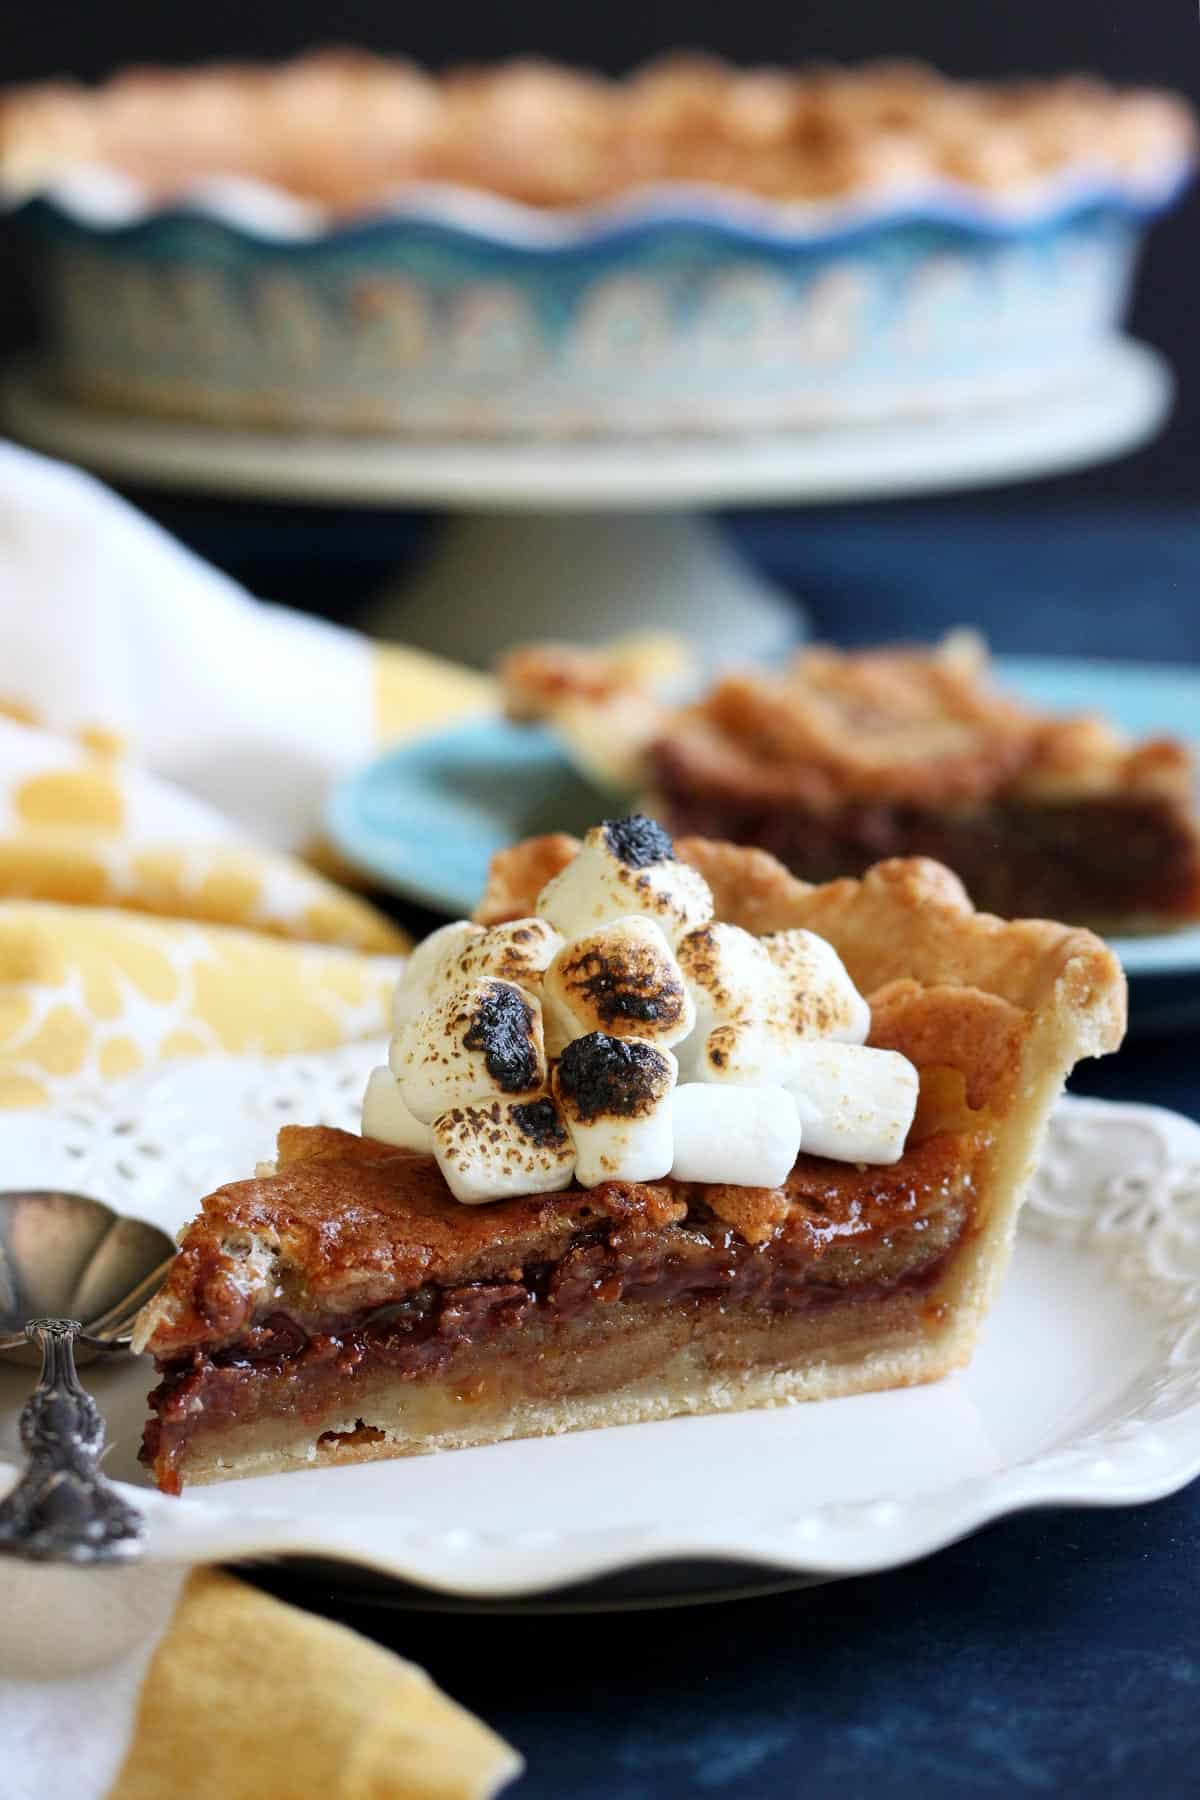 This S’mores Bomb Pie tastes like campfire s’mores on steroid. It is an intensely decadent dessert that will blow your mind! | wildwildwhisk.com